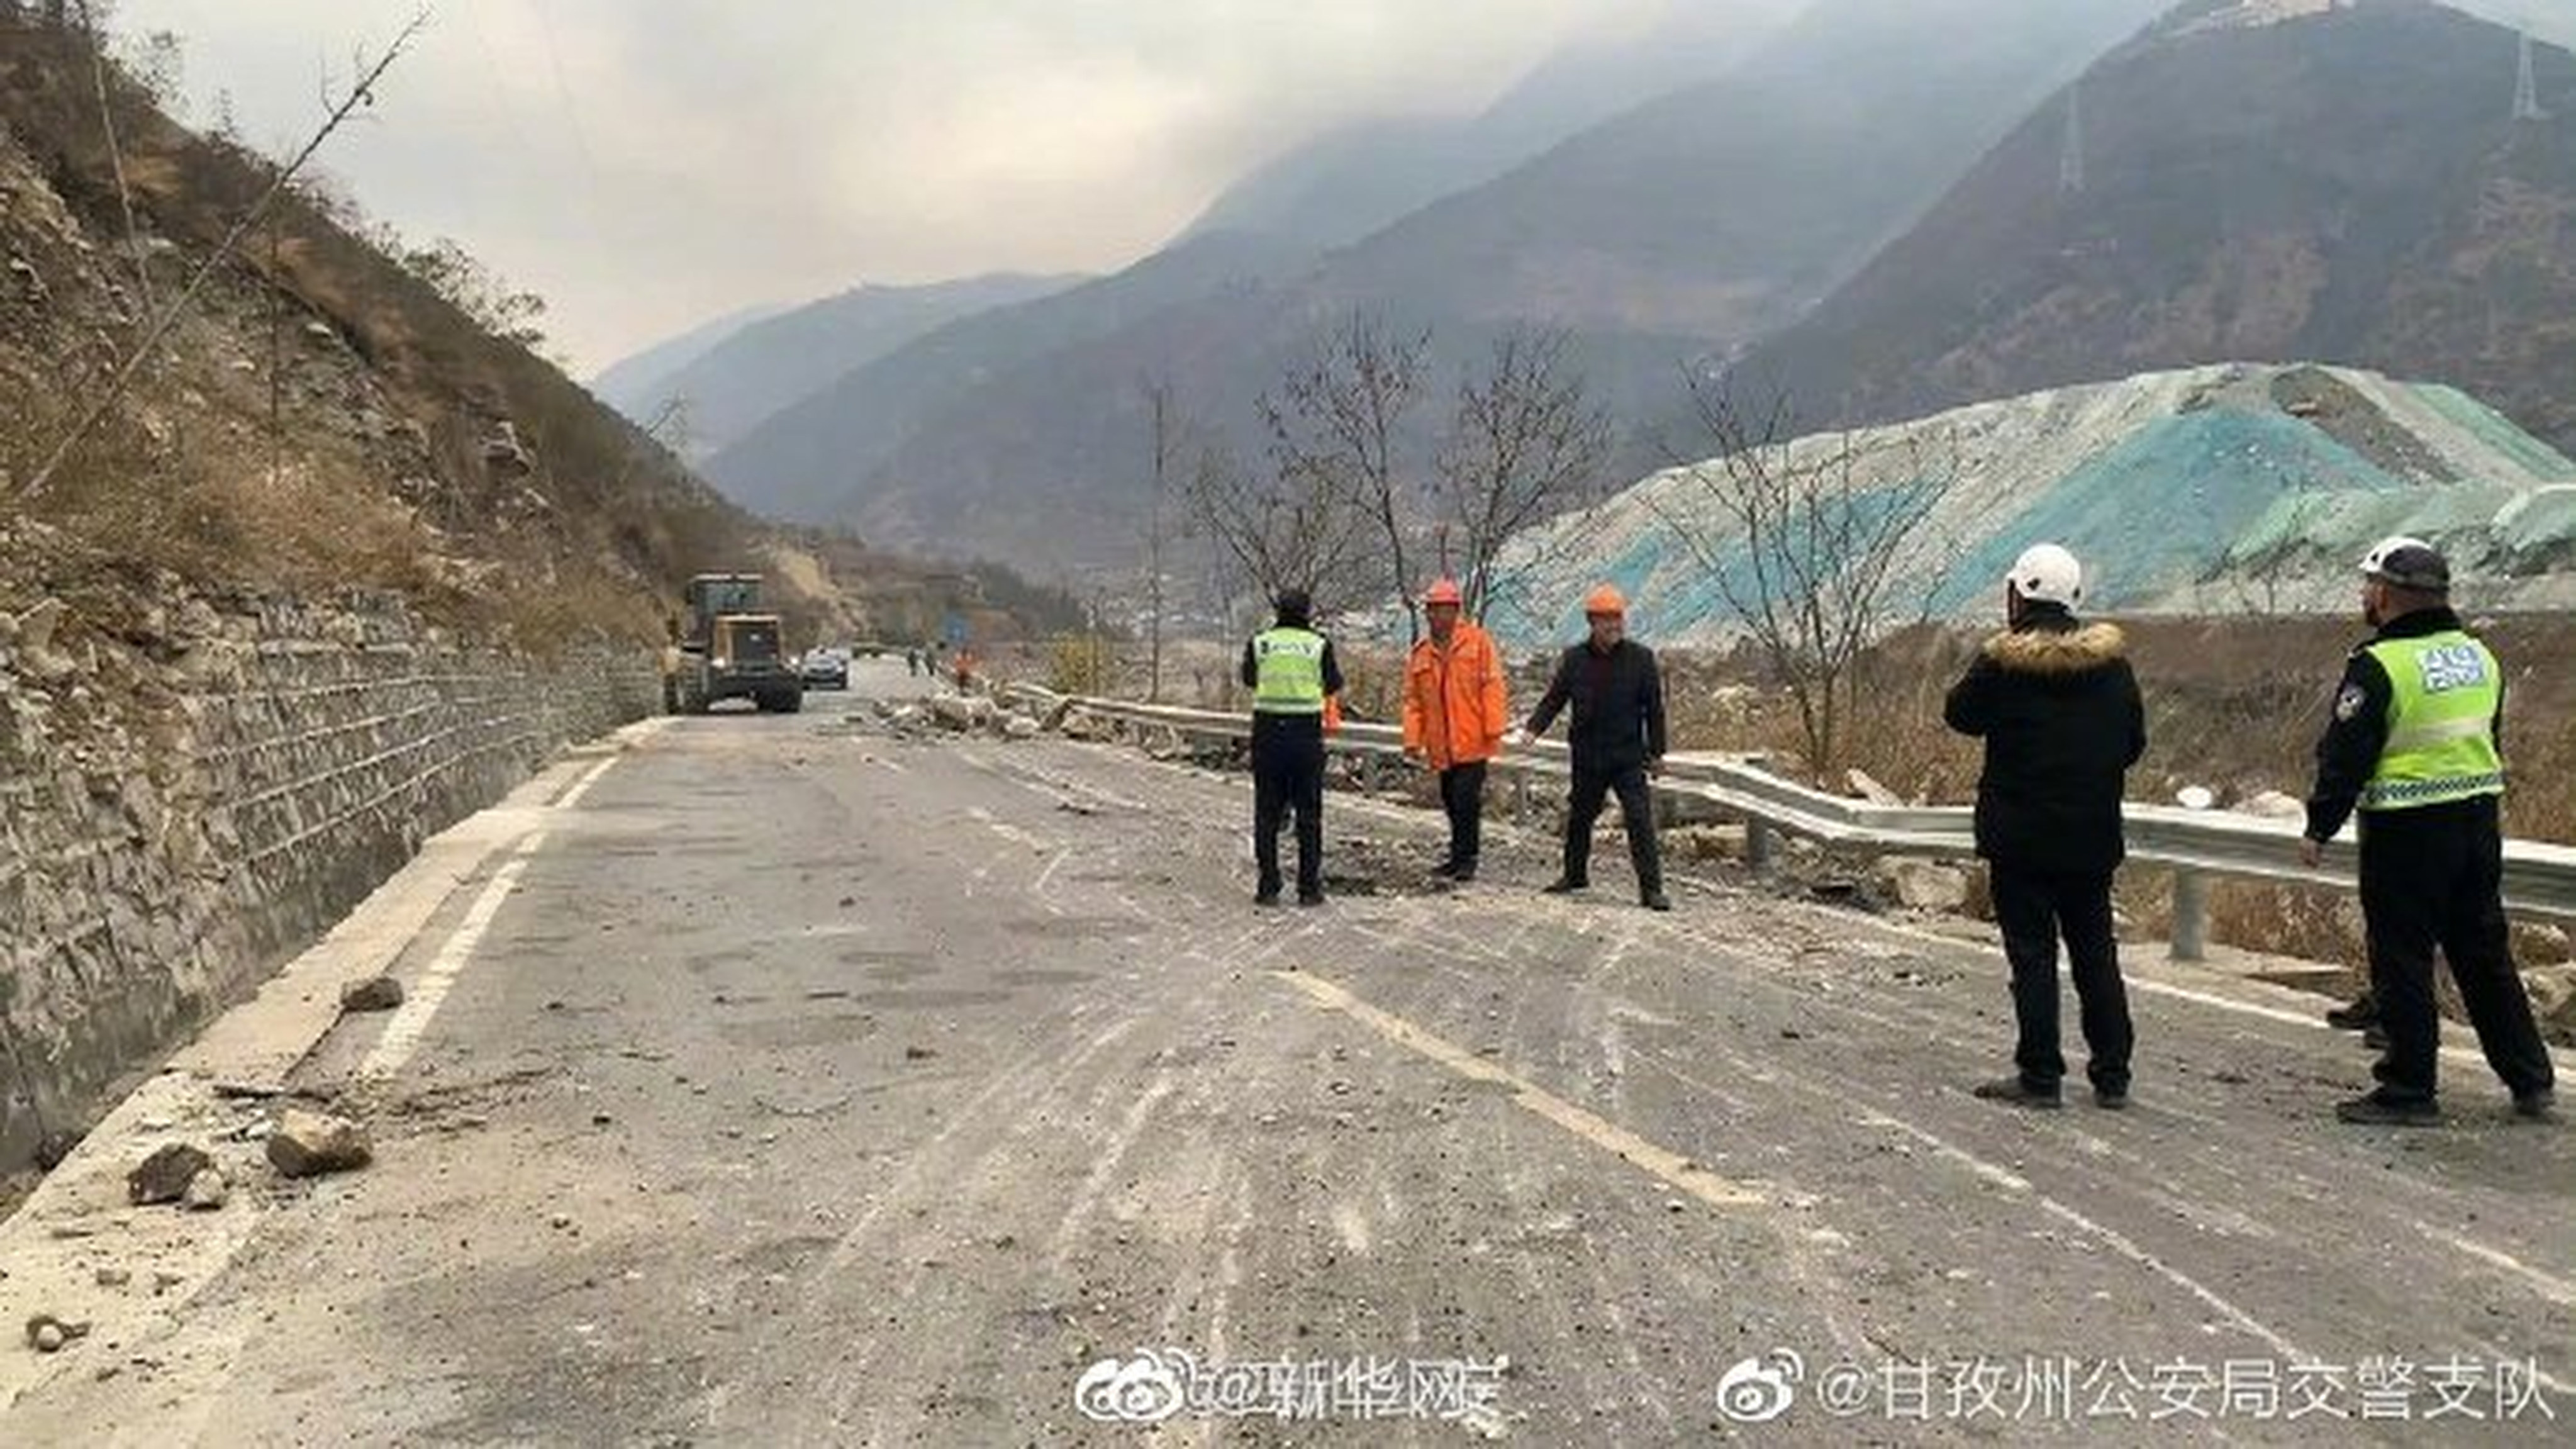 Roads were blocked by rockslides following an earthquake in Sichuan province on Thursday, but no other damage has been reported. Photo: Weibo